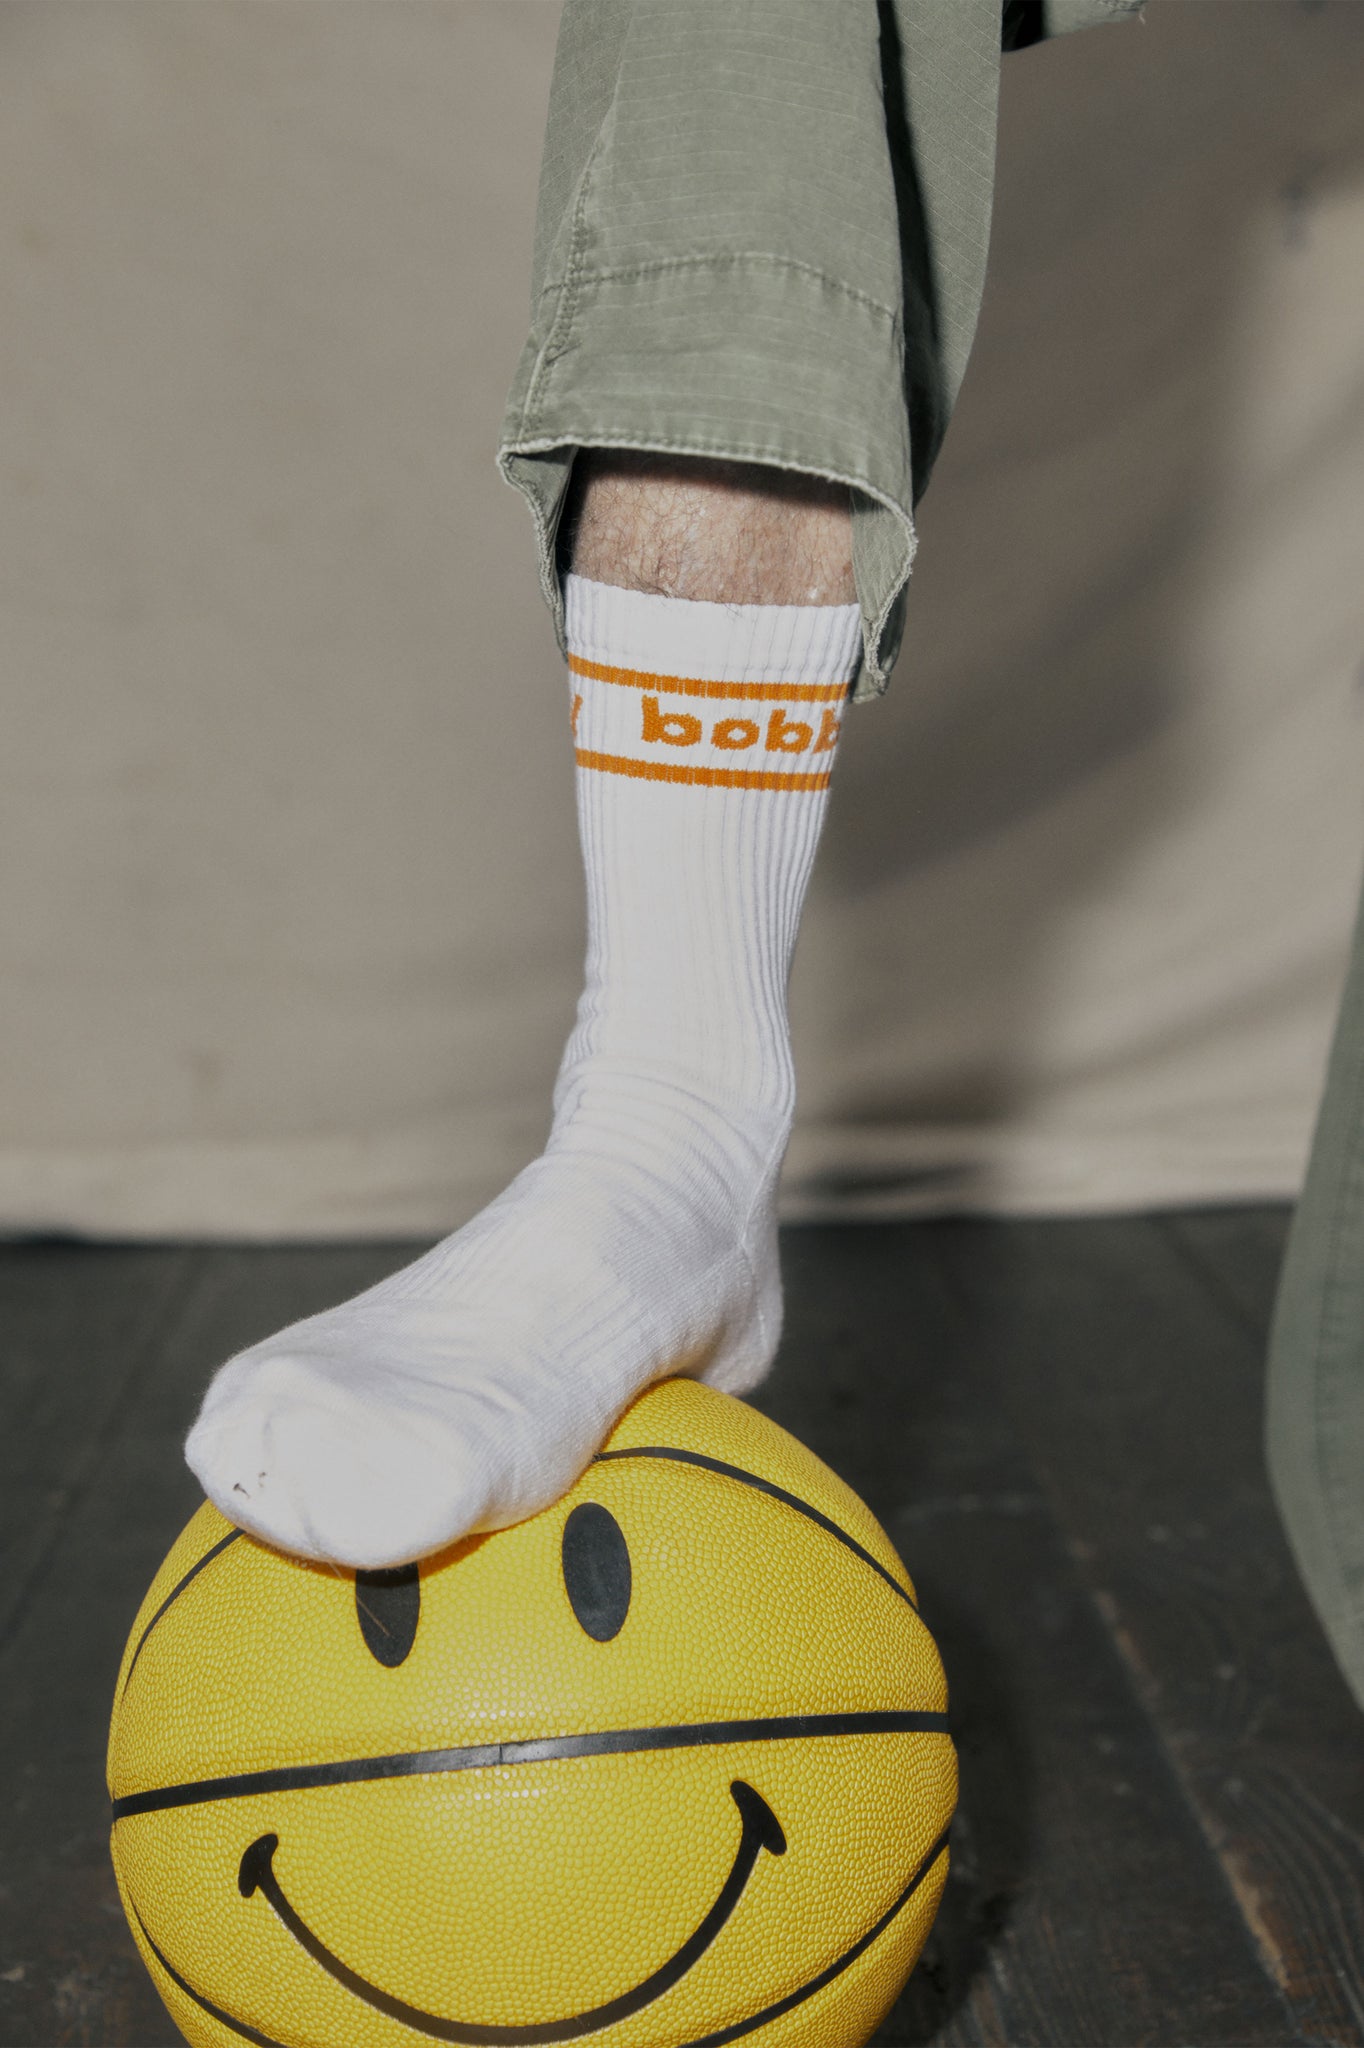 mans foot wearing white and orange branded socks while standing on a smiley face basketball